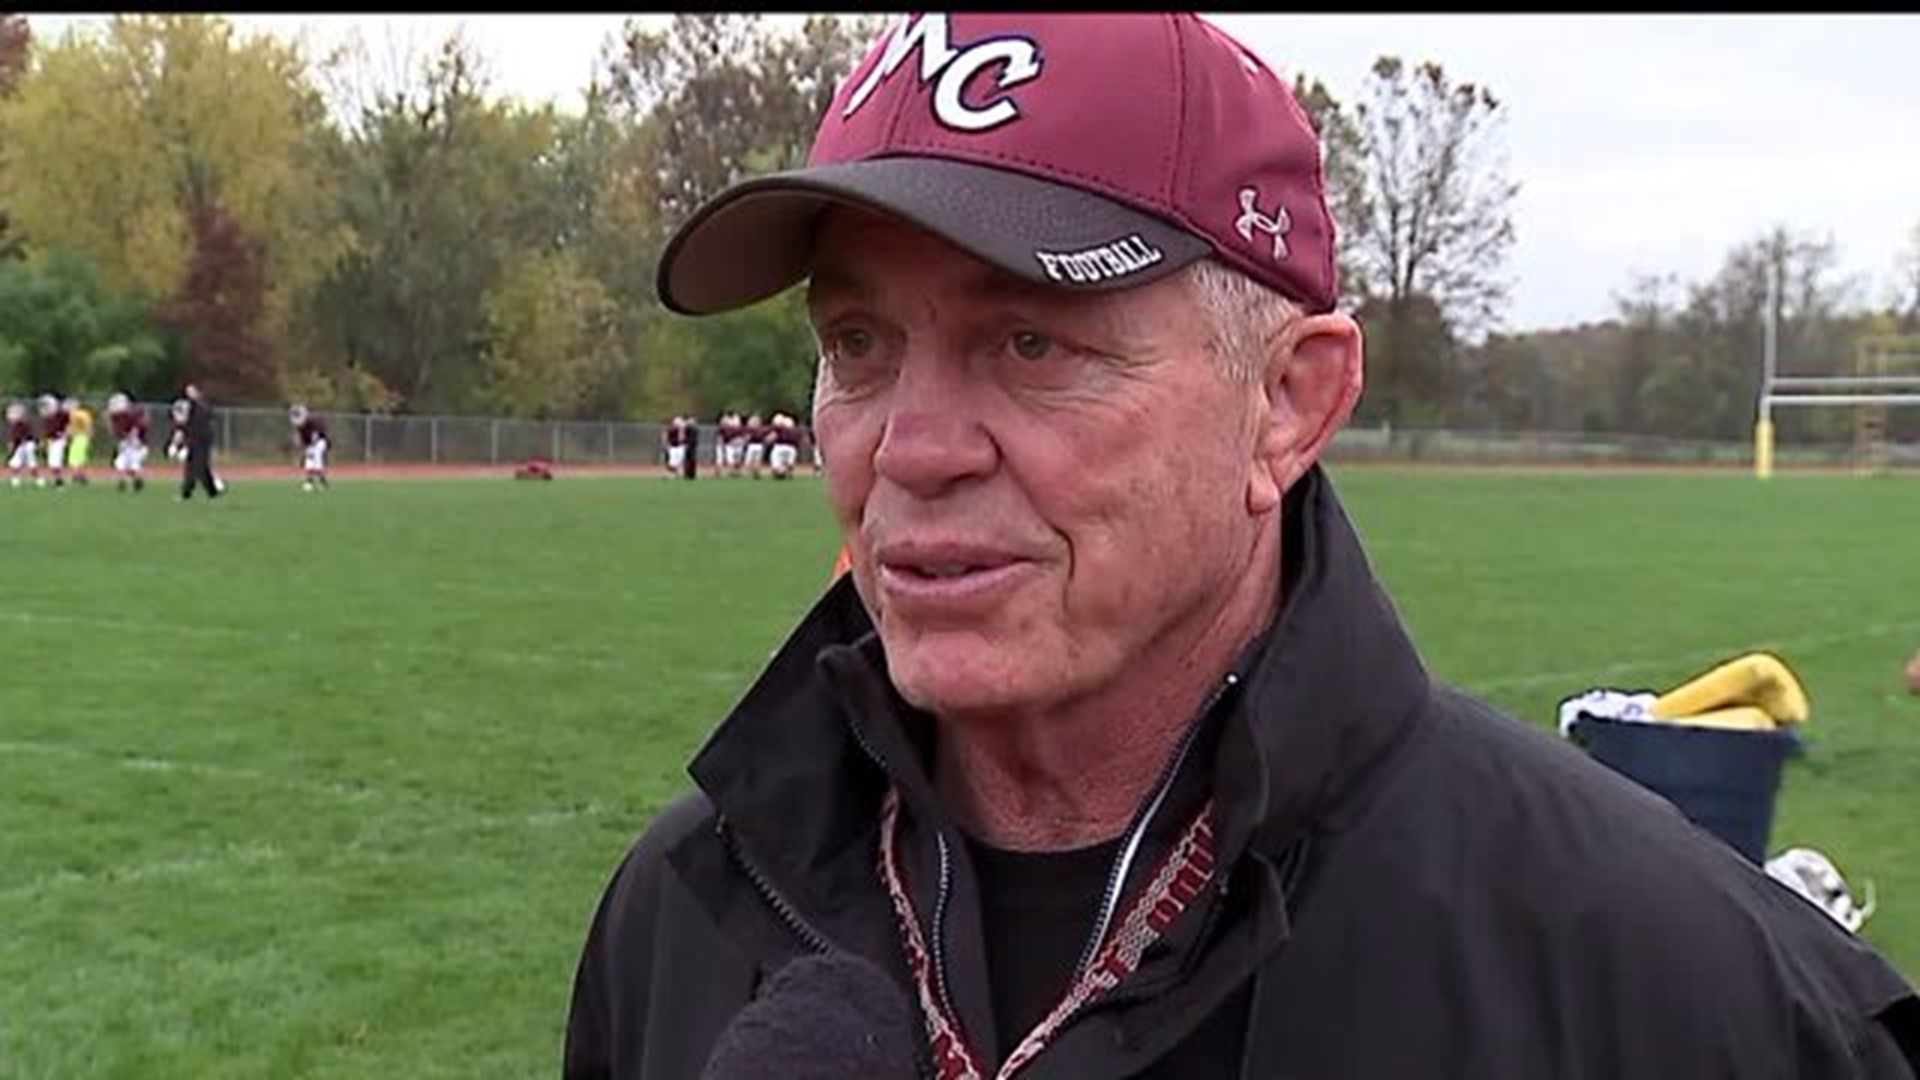 HSFF "Wired Up" with Manheim Central Head Coach Mike Williams